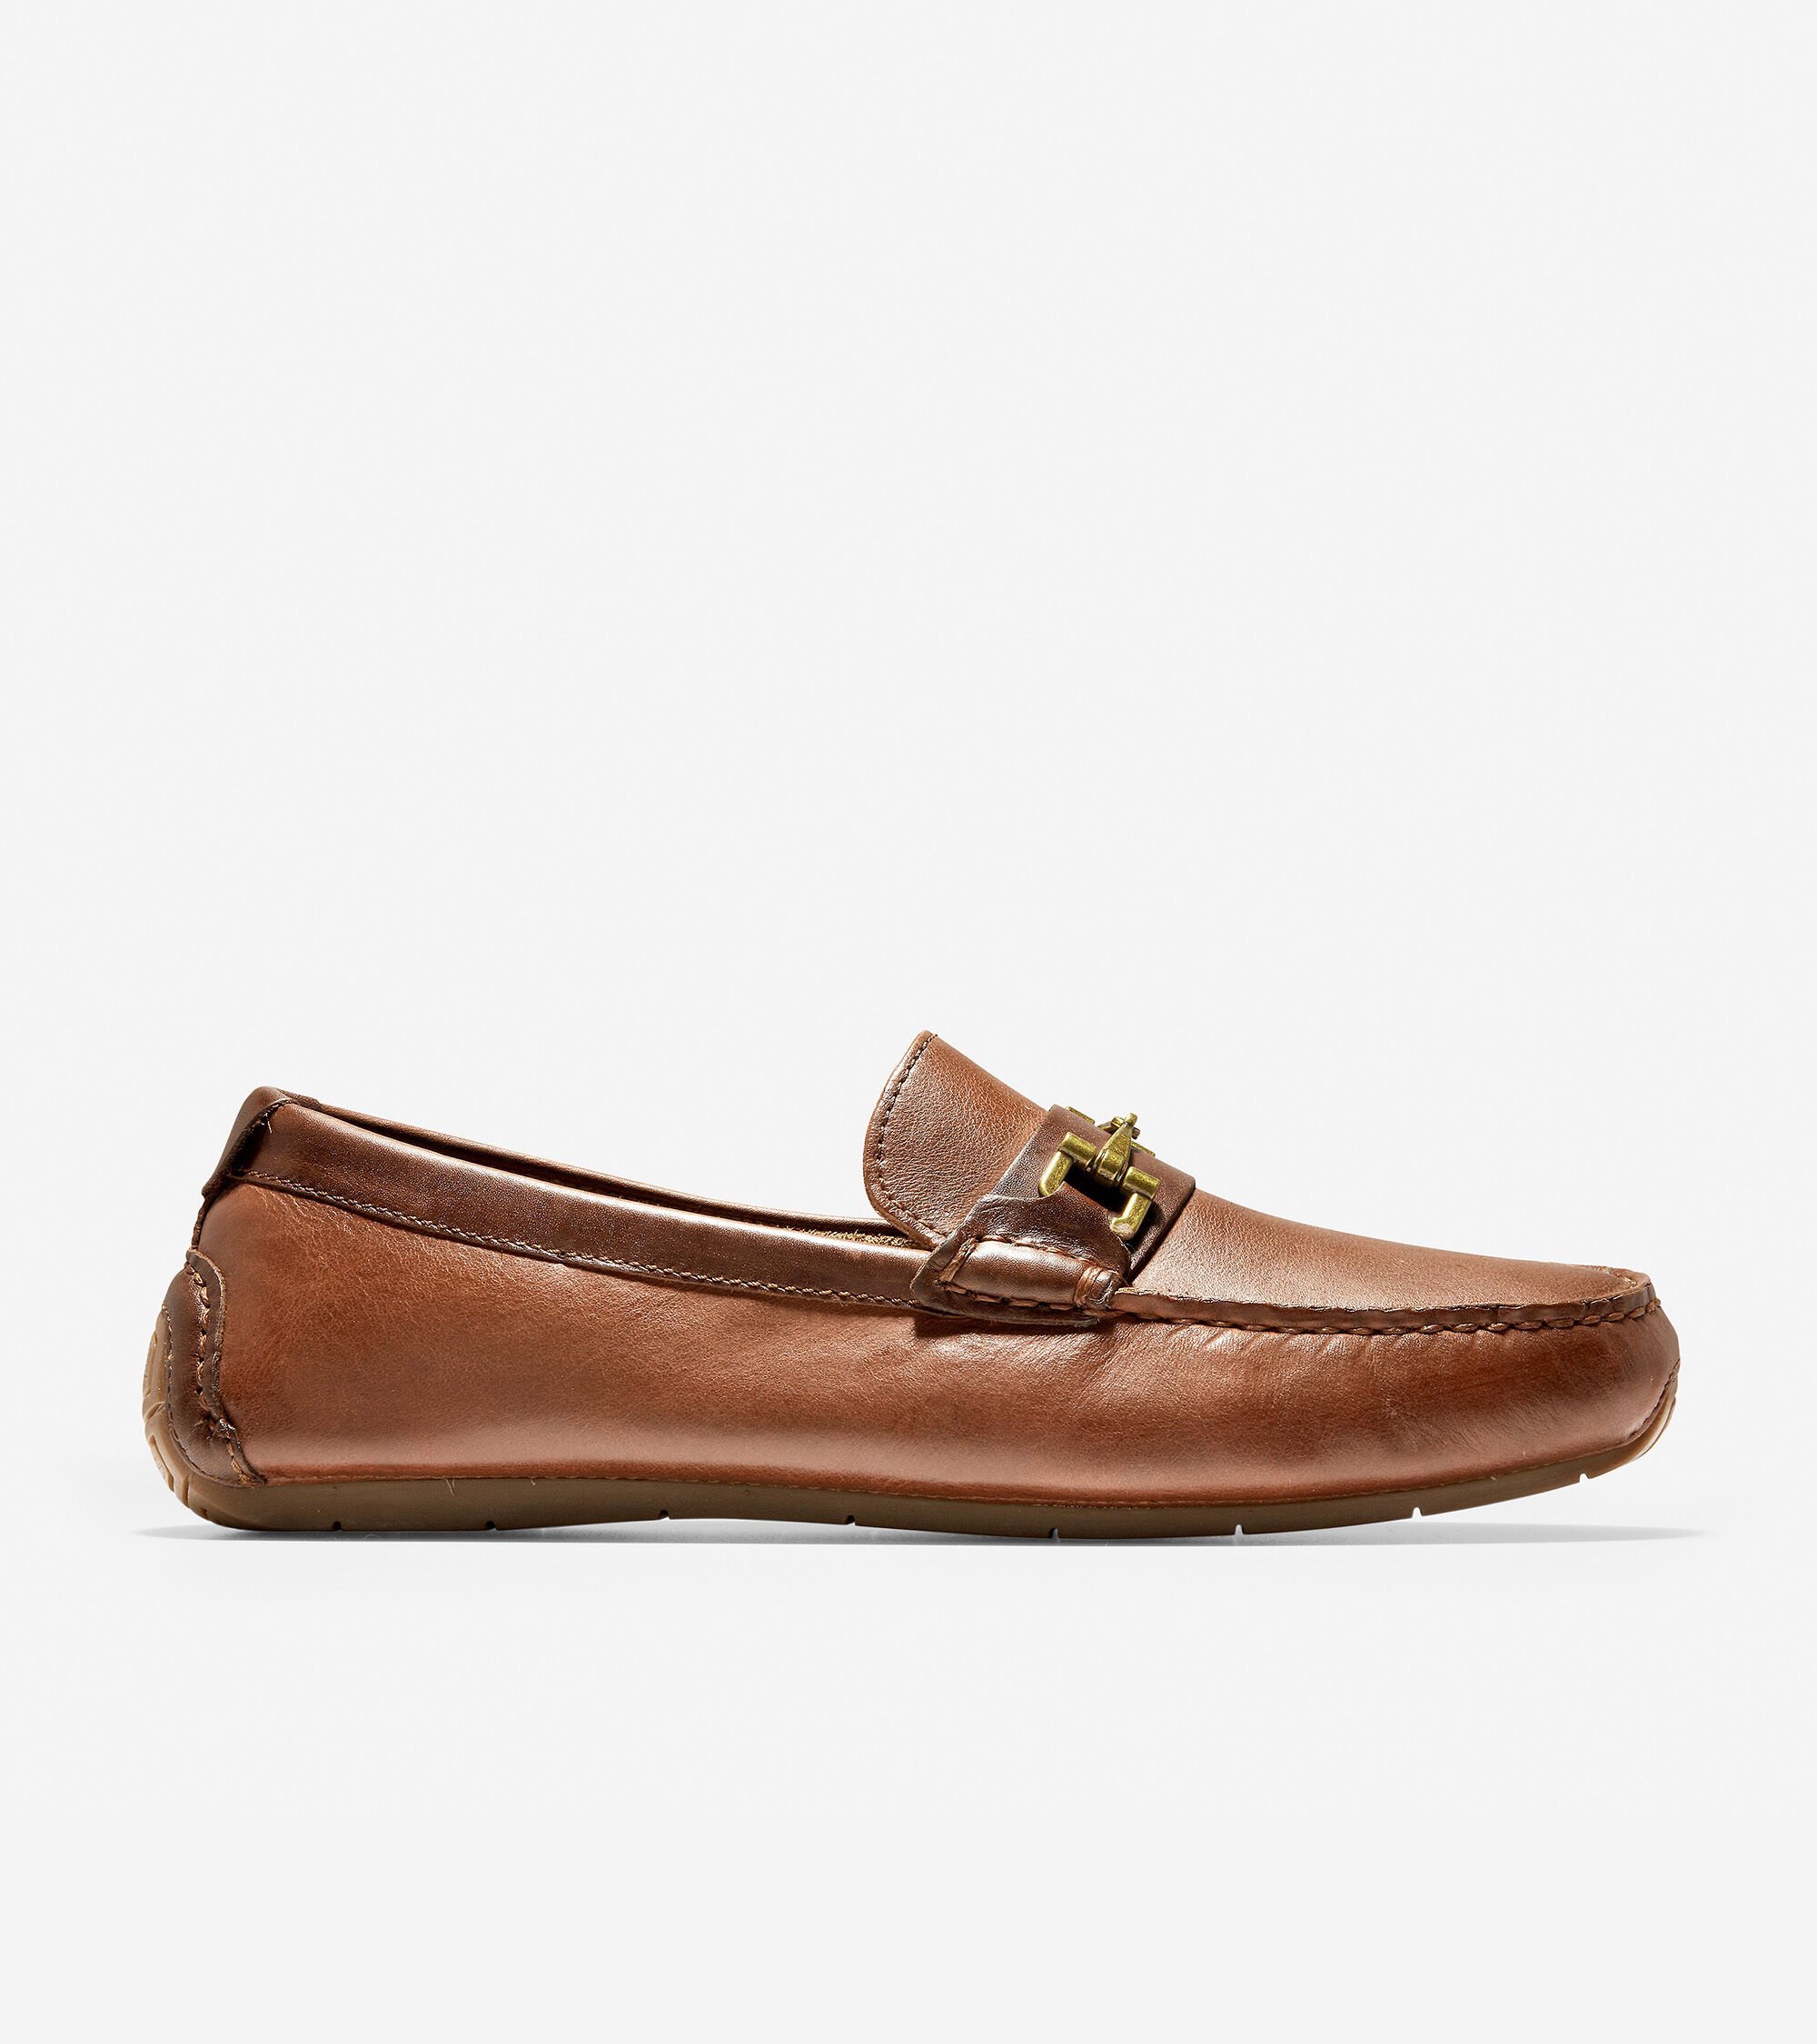 cole haan buckle loafer